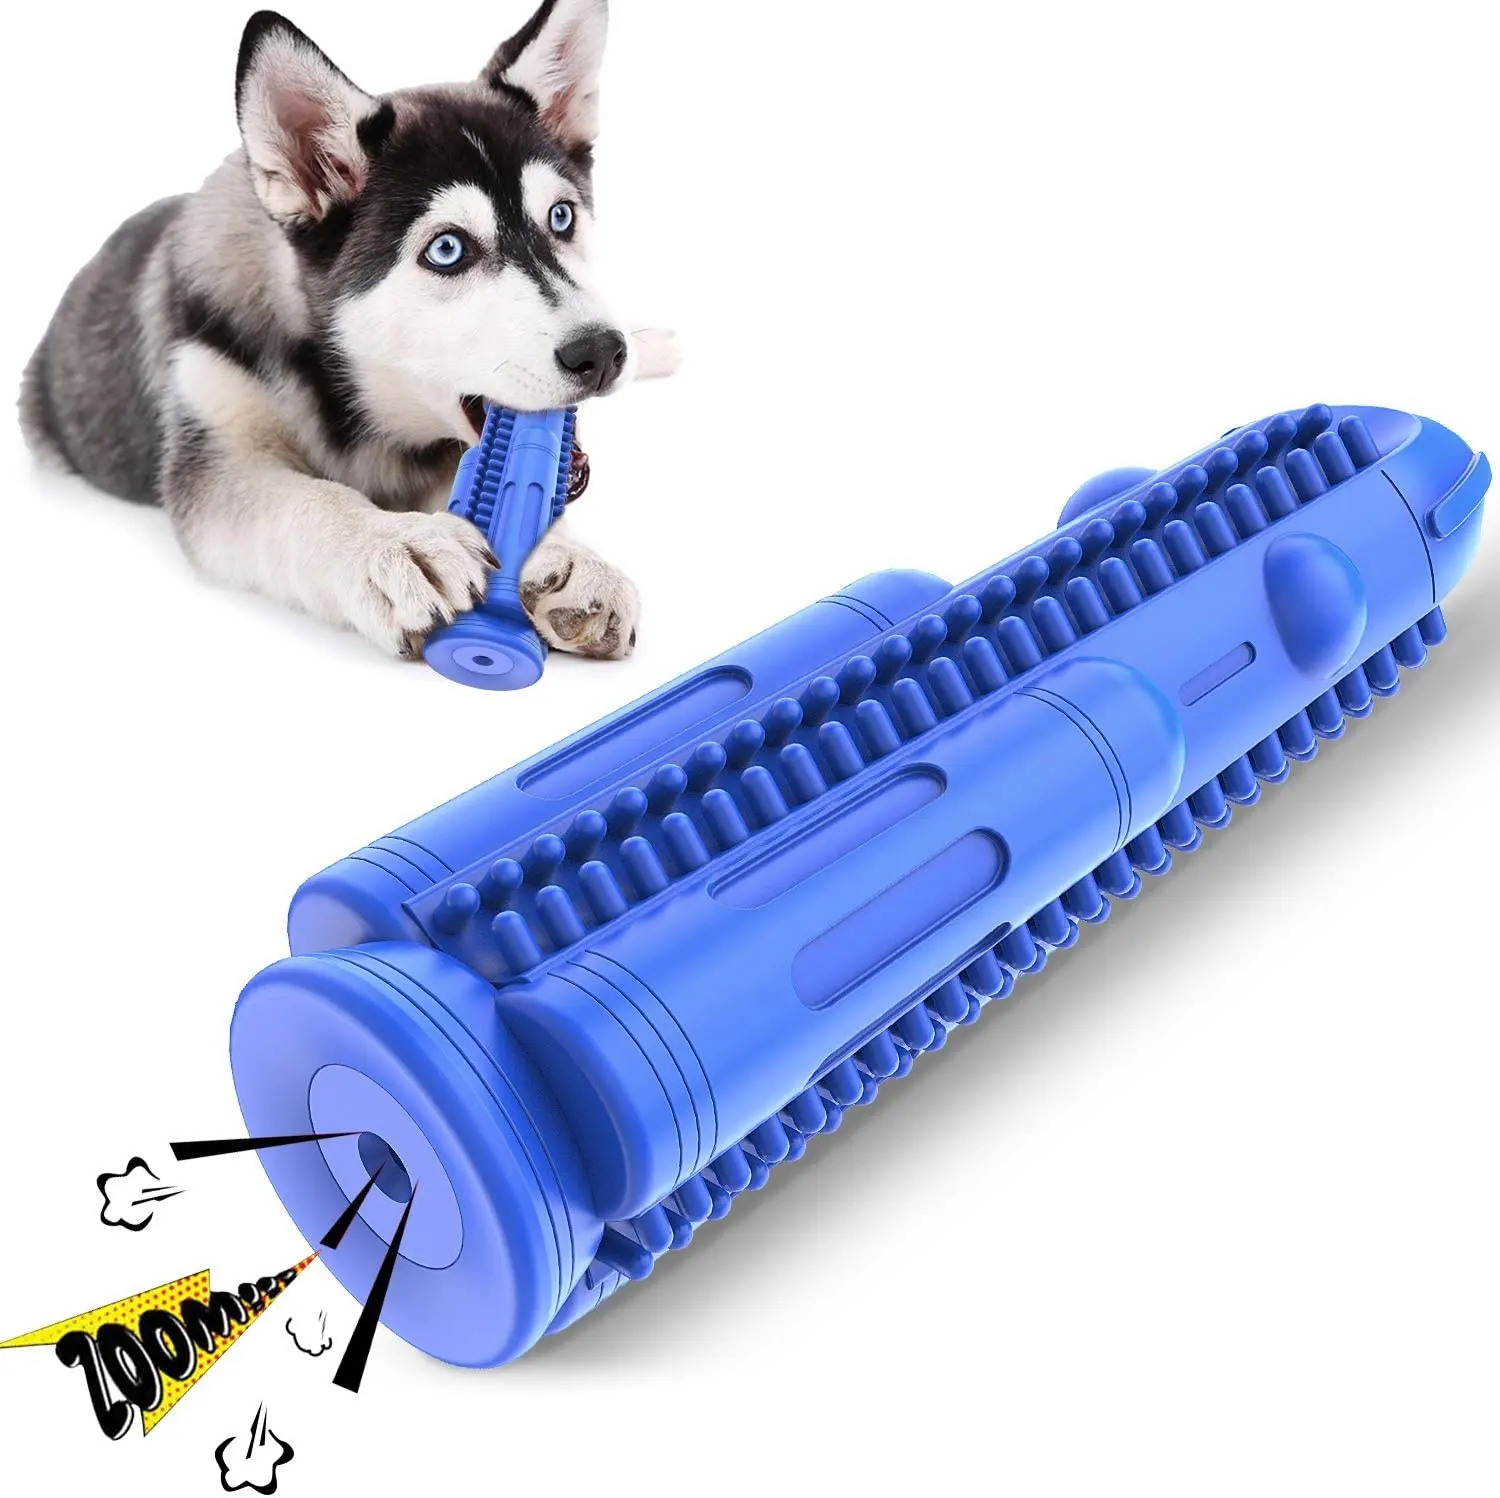 A-mazon Hot Sale Eco Friendly Indestructible Rubber Rocket Dog Squeaky Chew Toys For Aggressive Chewers